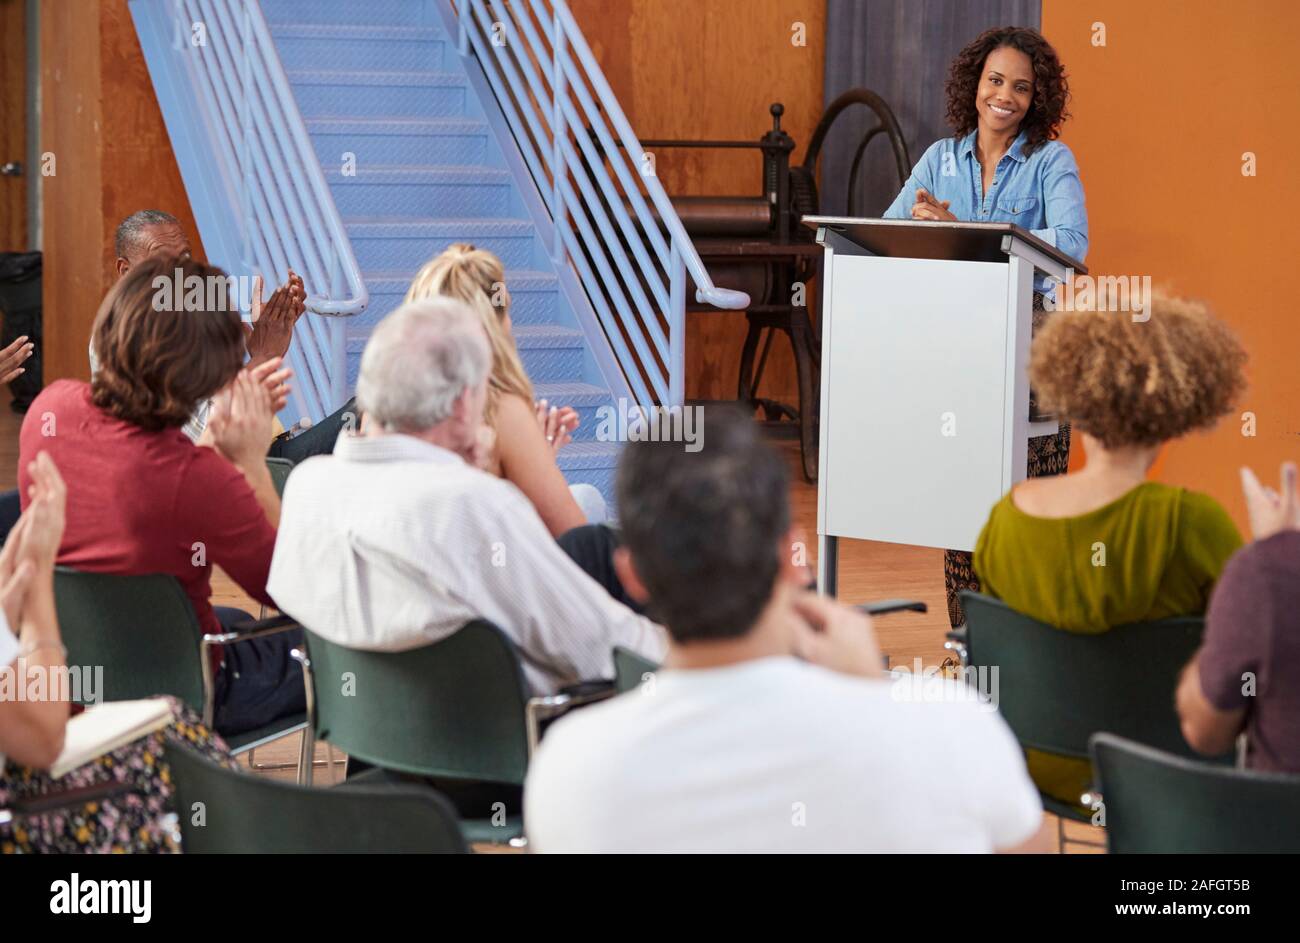 Woman At Podium Chairing Neighborhood Meeting In Community Centre Stock Photo